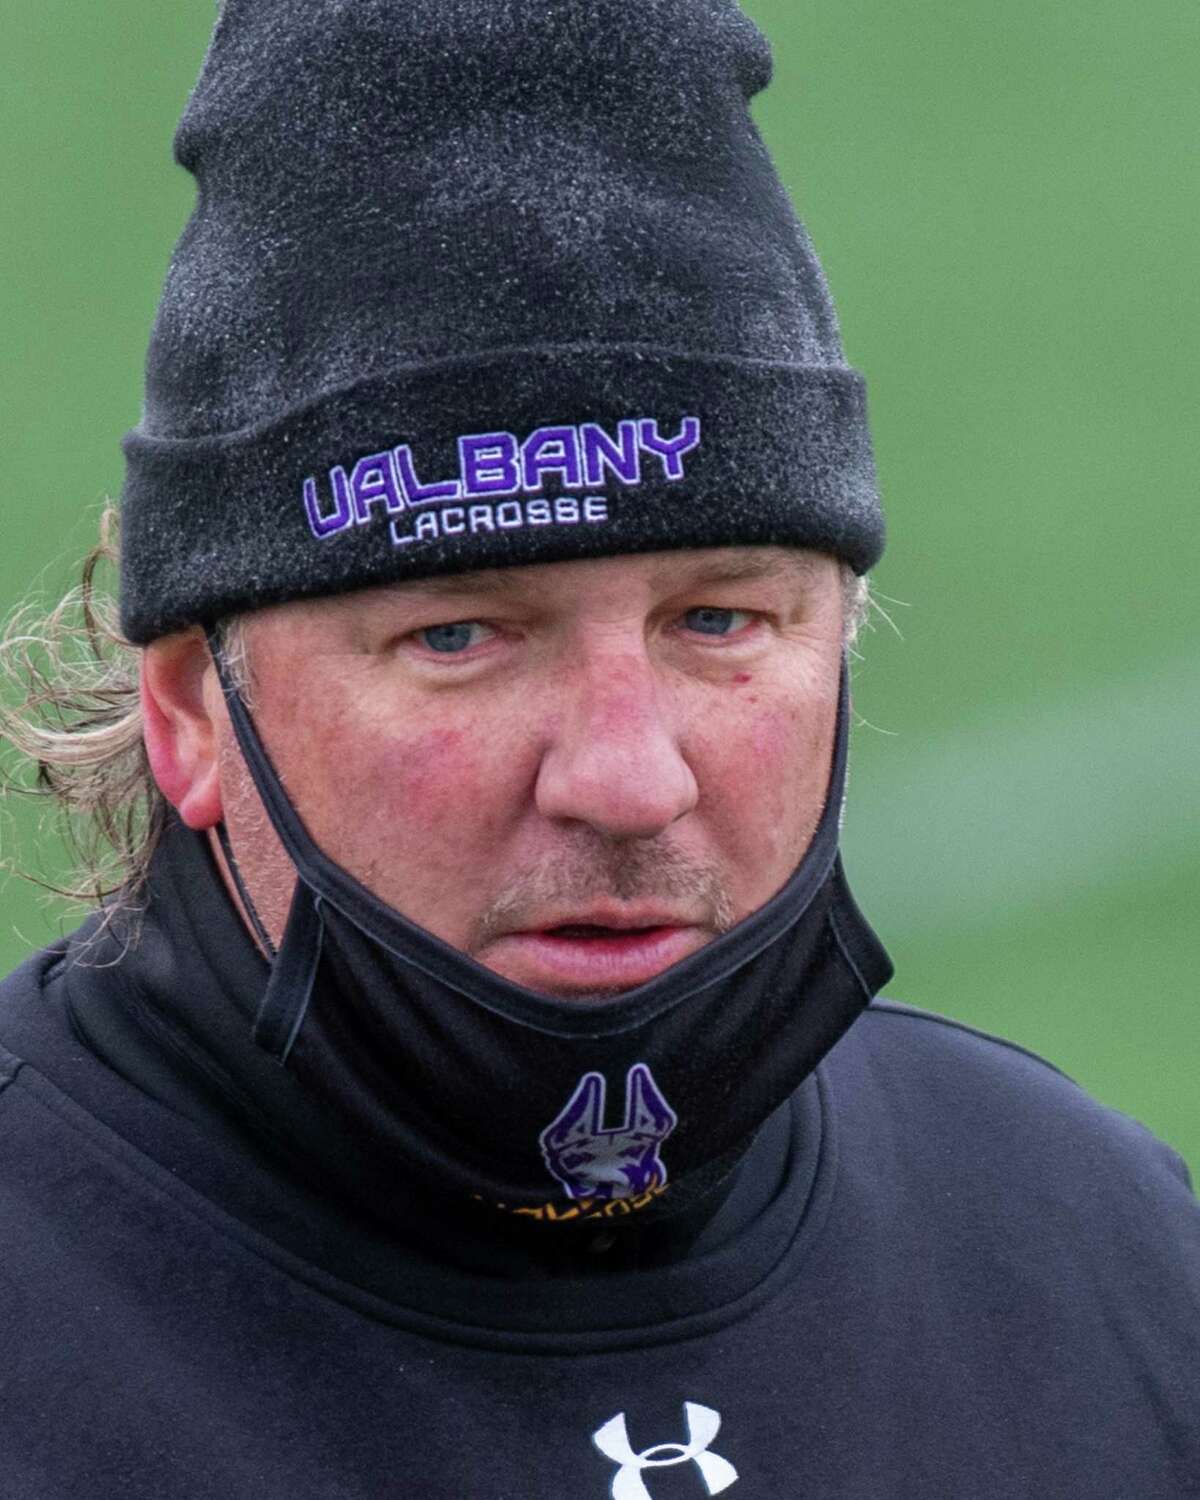 UAlbany lacrosse coach Scott Marr said his team lacked poise with the ball and had some defensive lapses in a 16-14 loss to Vermont. (Jim Franco/Special to the Times Union)